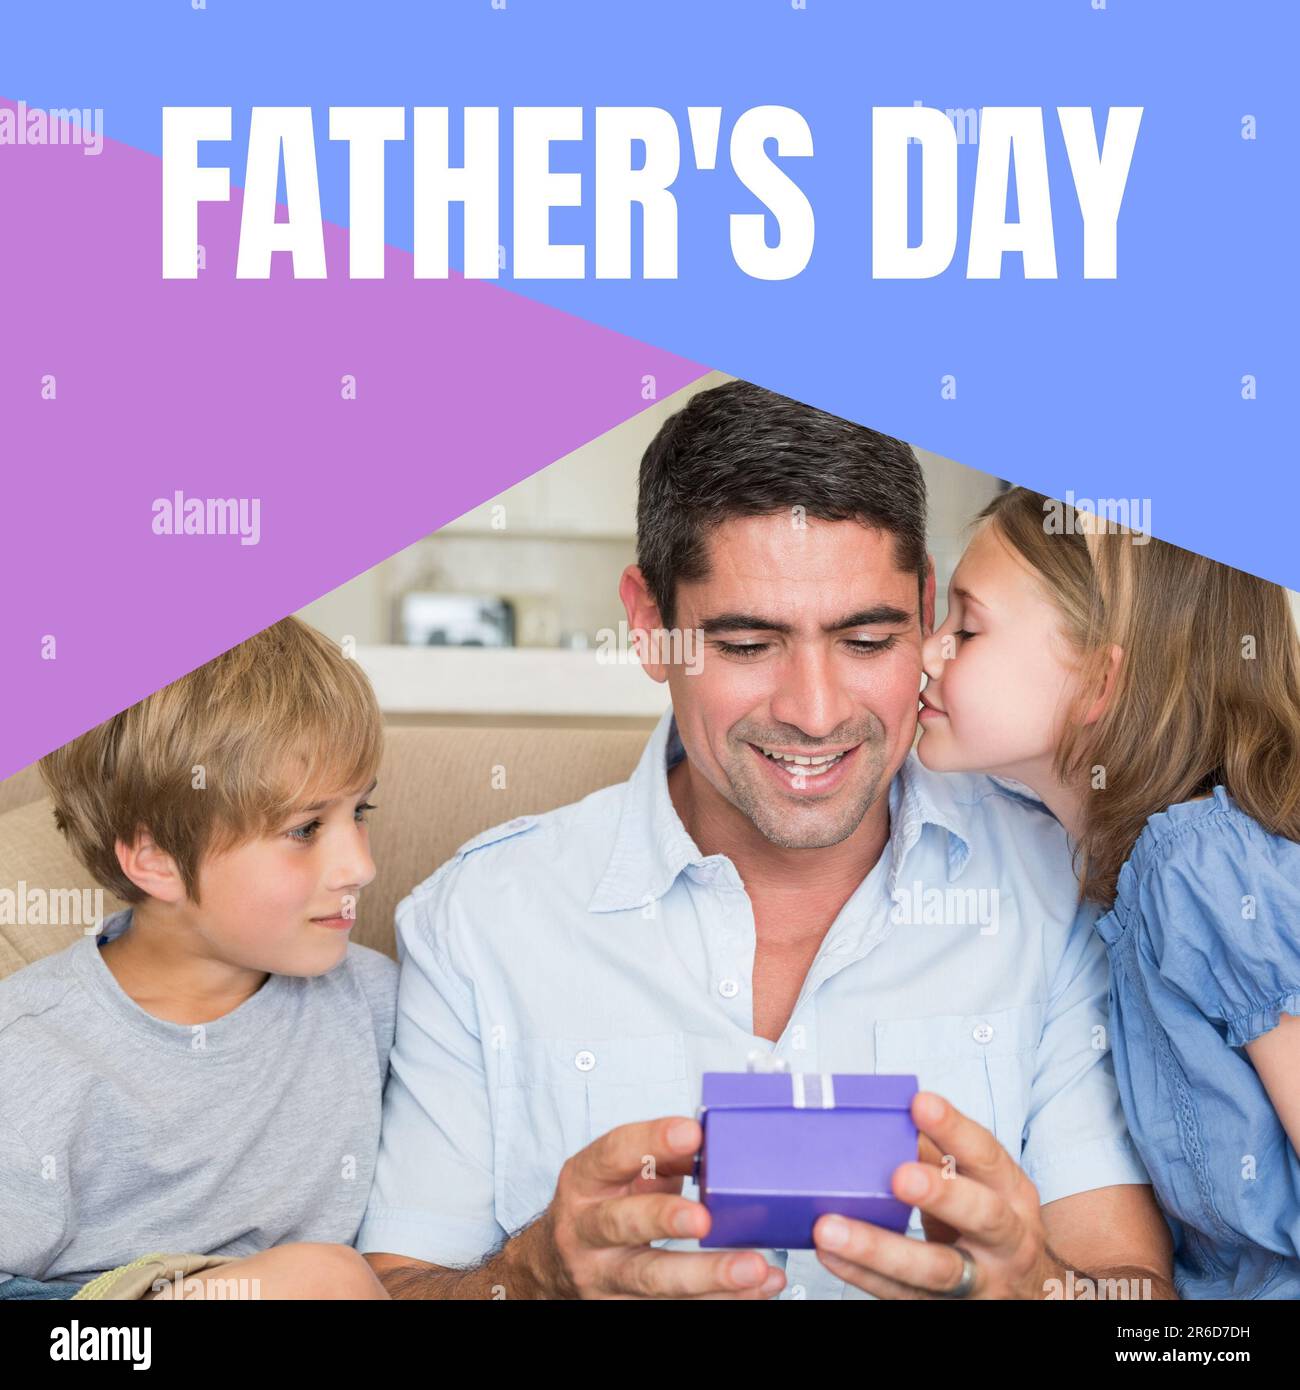 Composite of father's day text and caucasian father holding gift and sitting with boy and girl Stock Photo